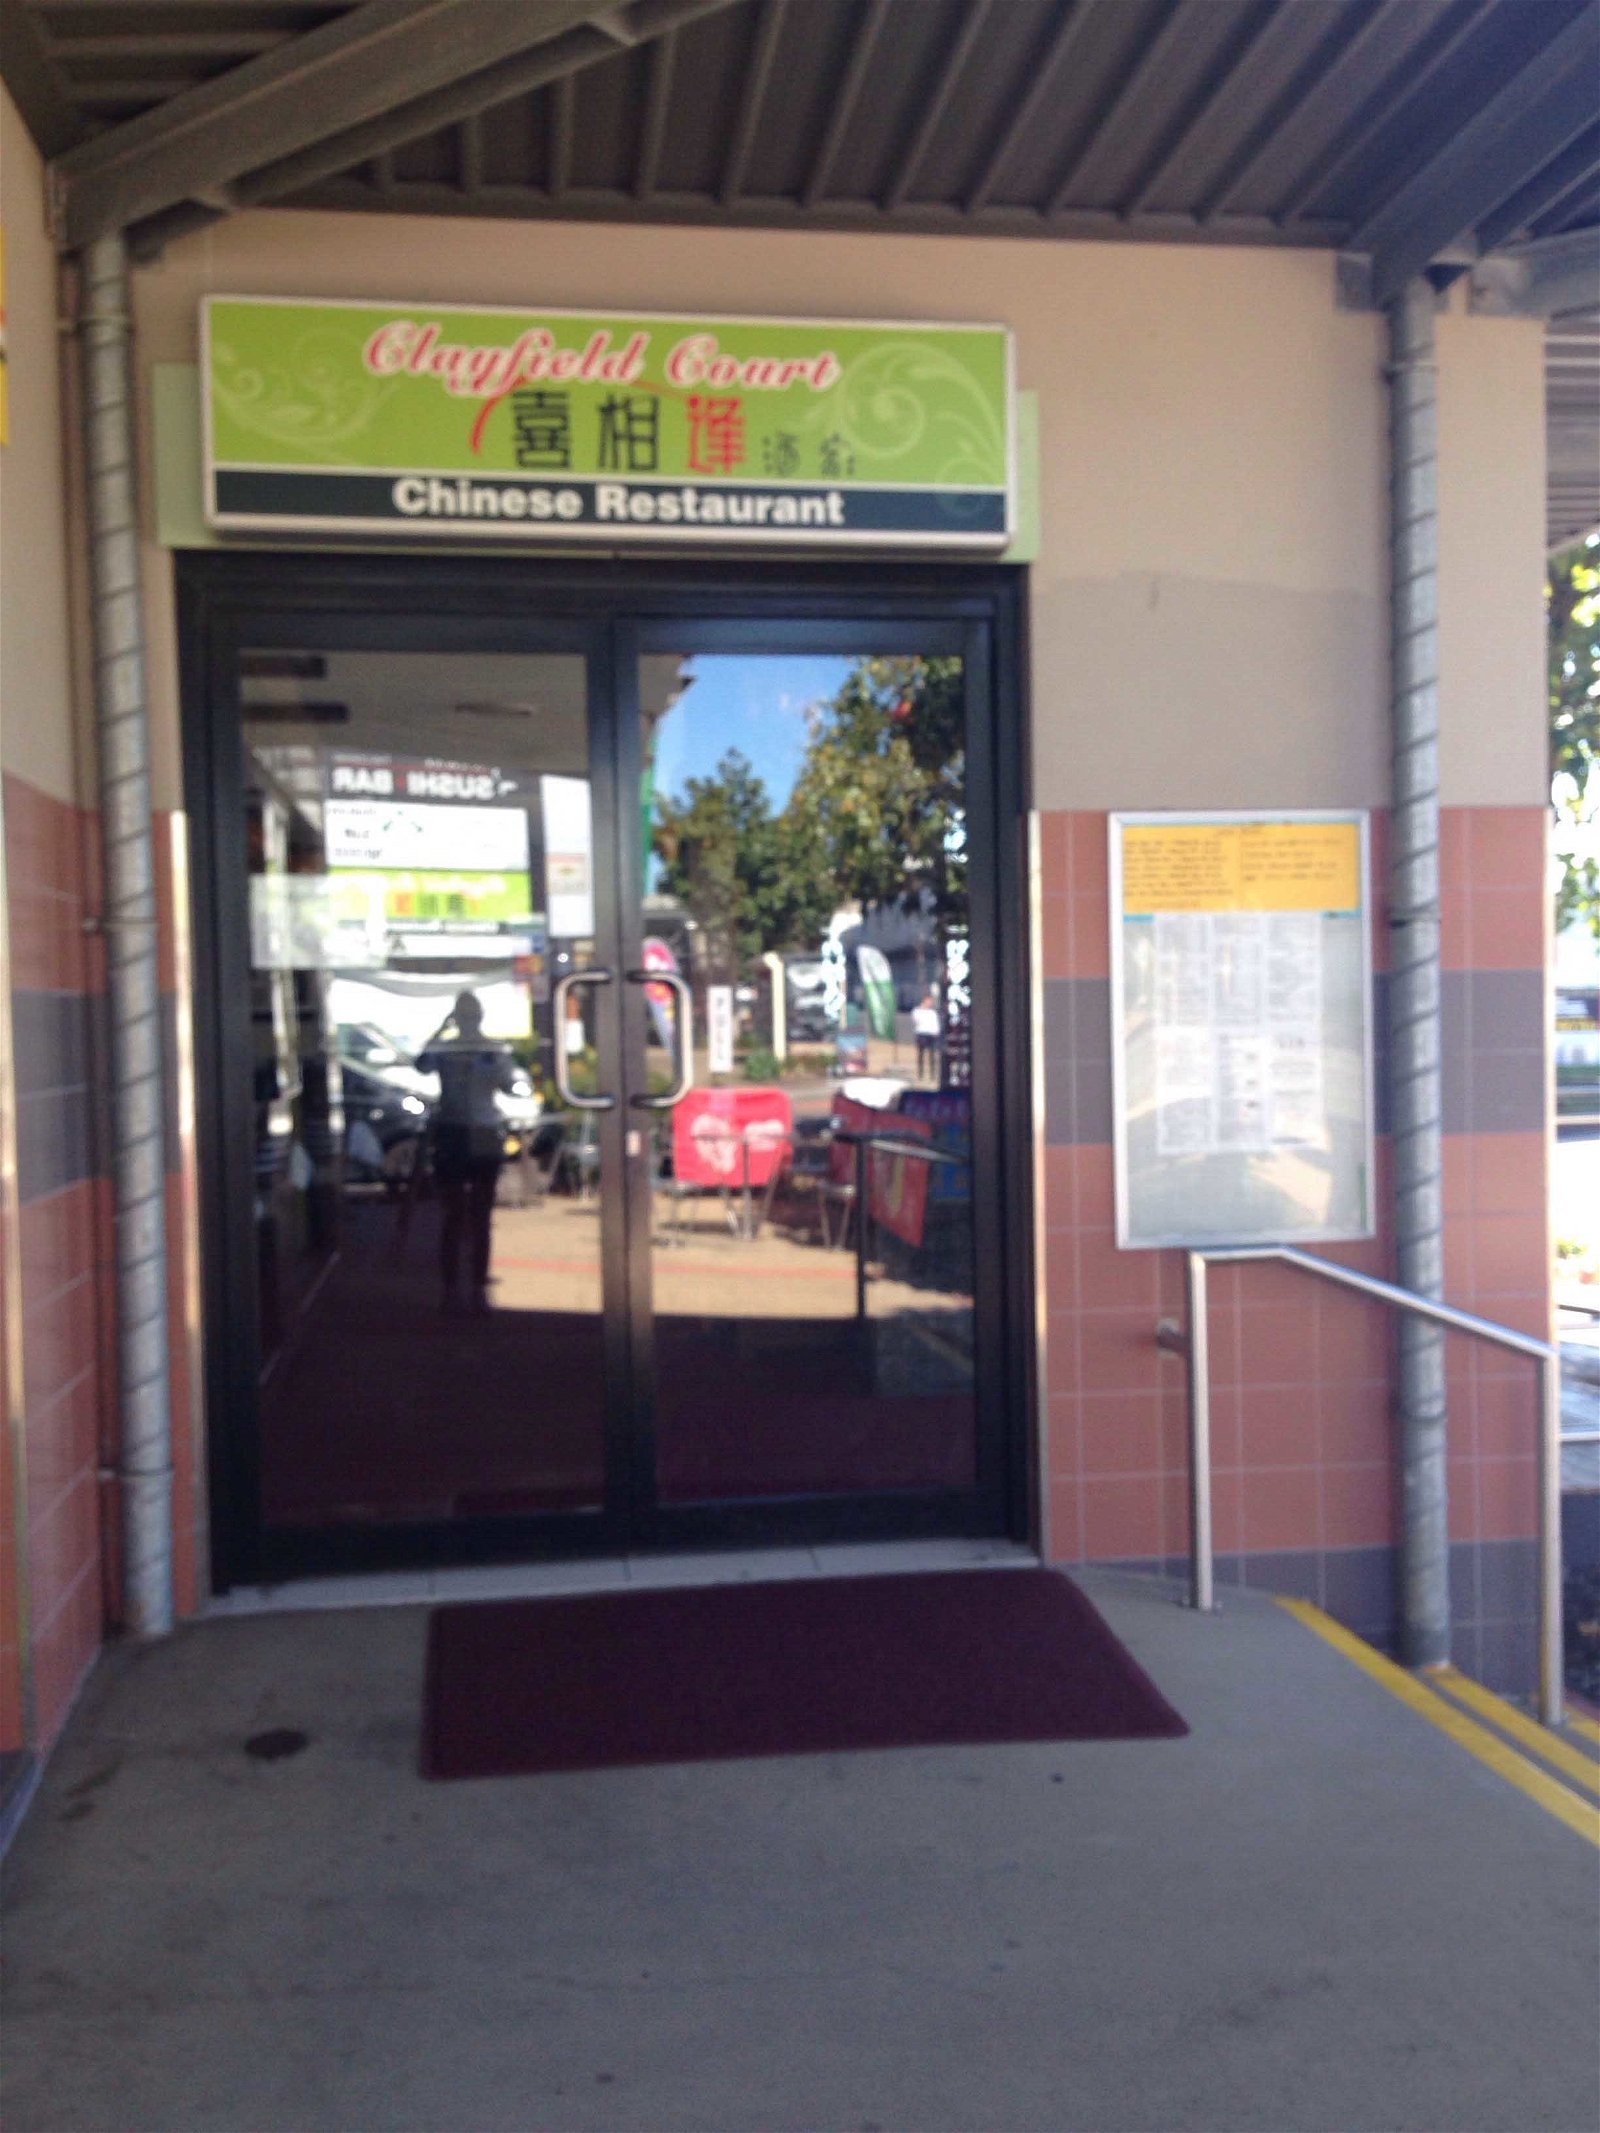 Clayfield Court Chinese Restaurant - Go Out